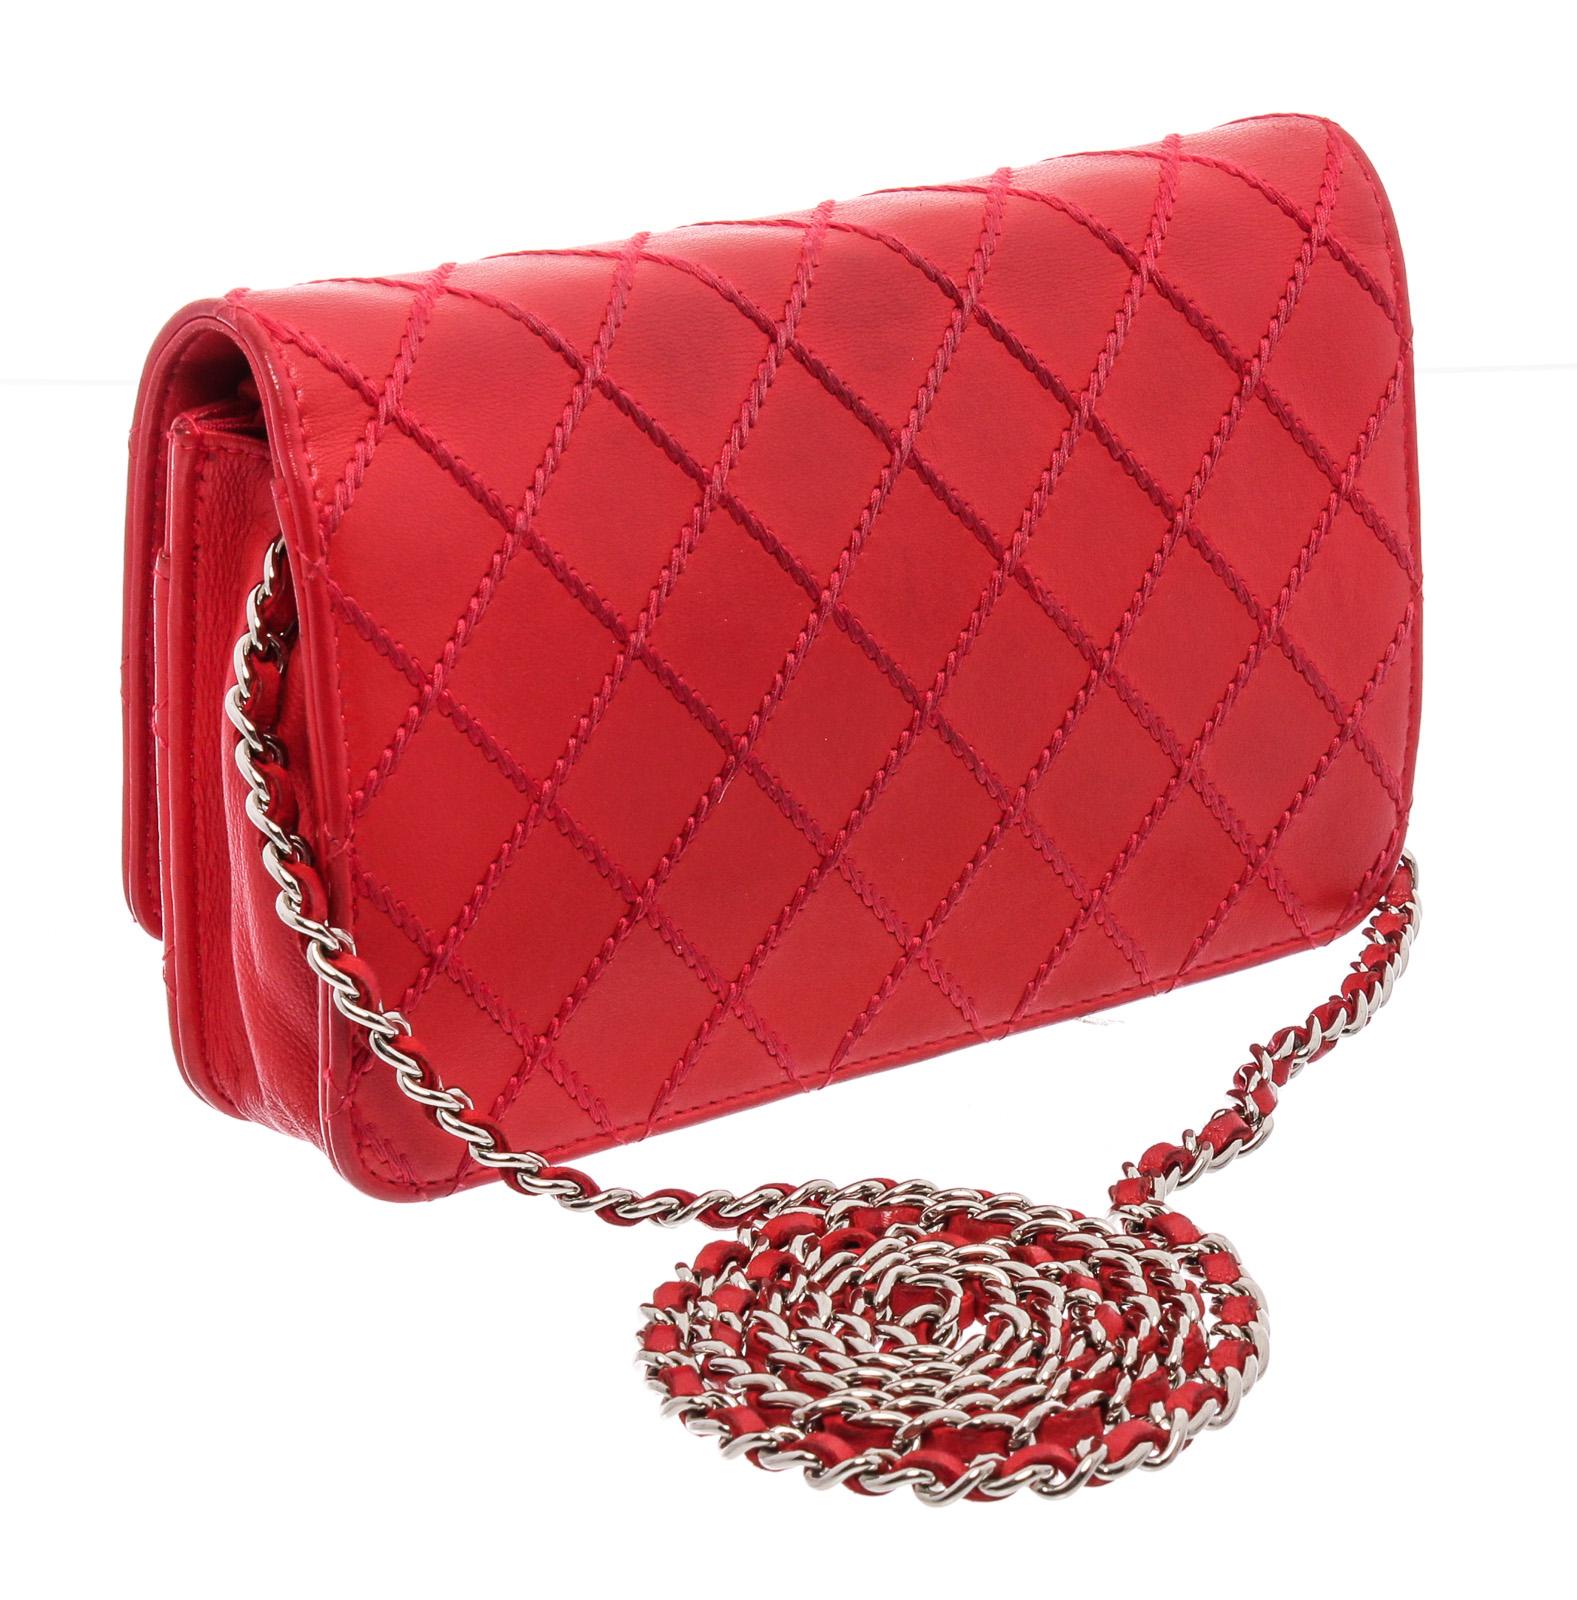 Red Diamond Stitch lambskin Chanel Wallet on Chain with silver-tone hardware, single chain-link and leather shoulder strap, single zip pocket at flap underside, single slit pocket under flap, tonal grosgrain lining, dual interior pockets; one with